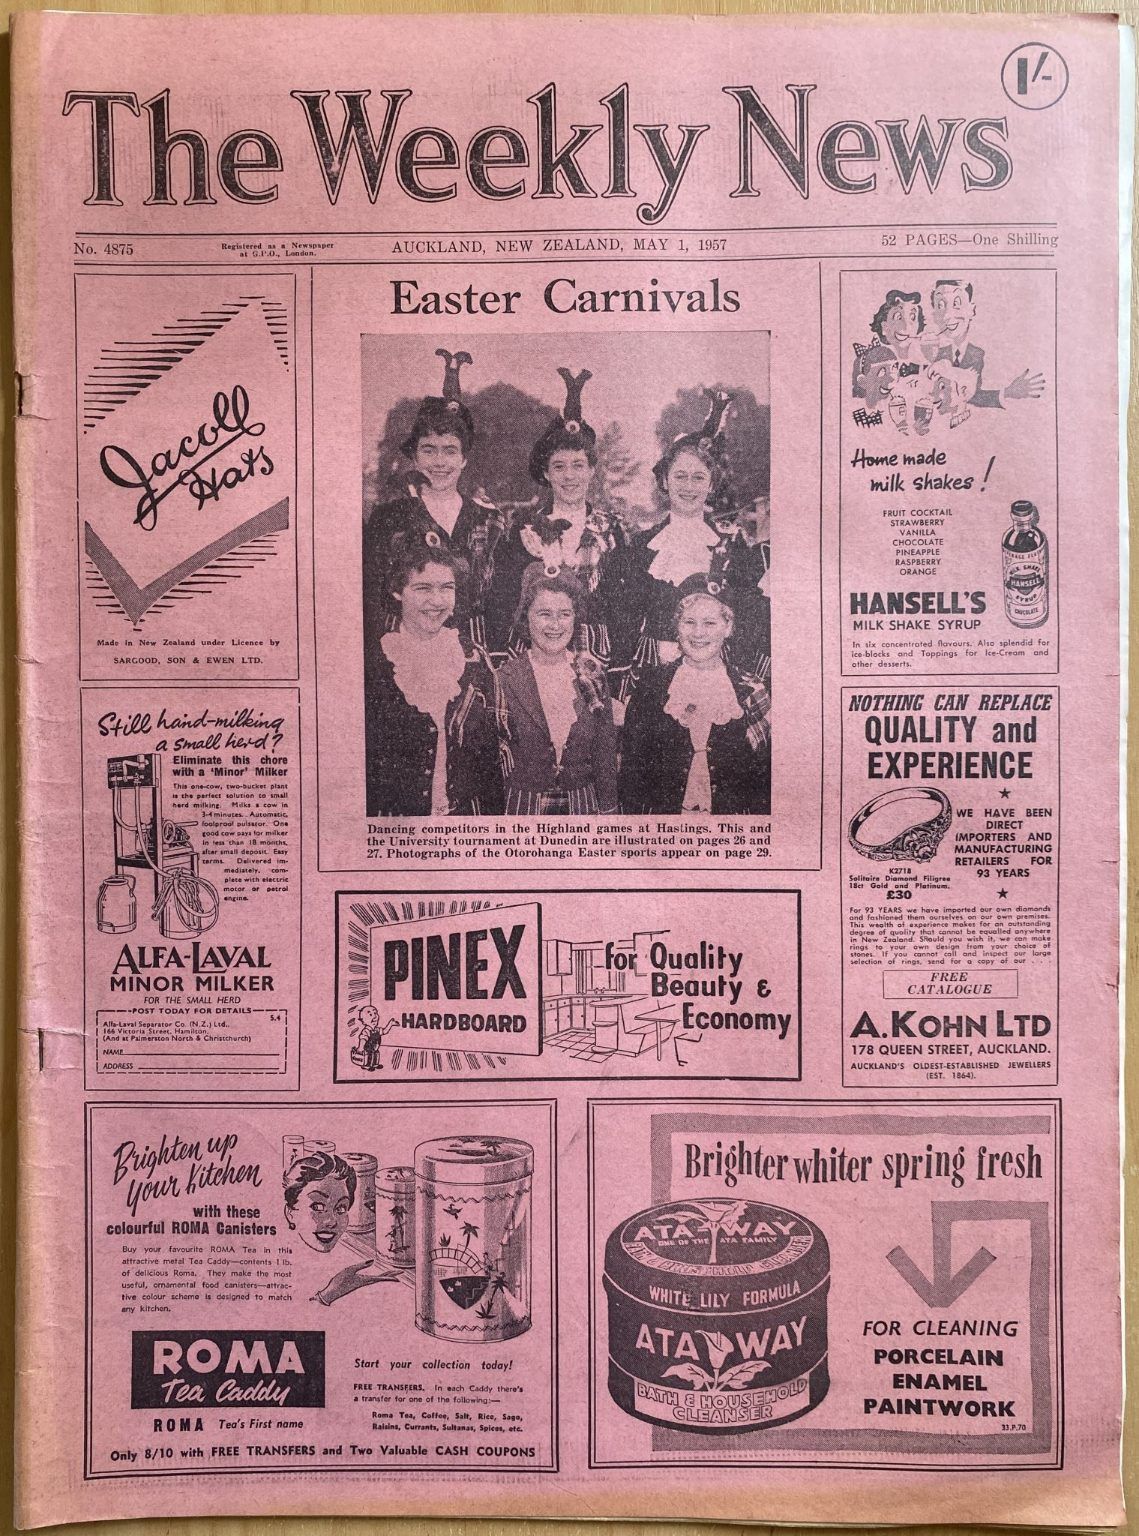 OLD NEWSPAPER: The Weekly News, No. 4875, 1 May 1957